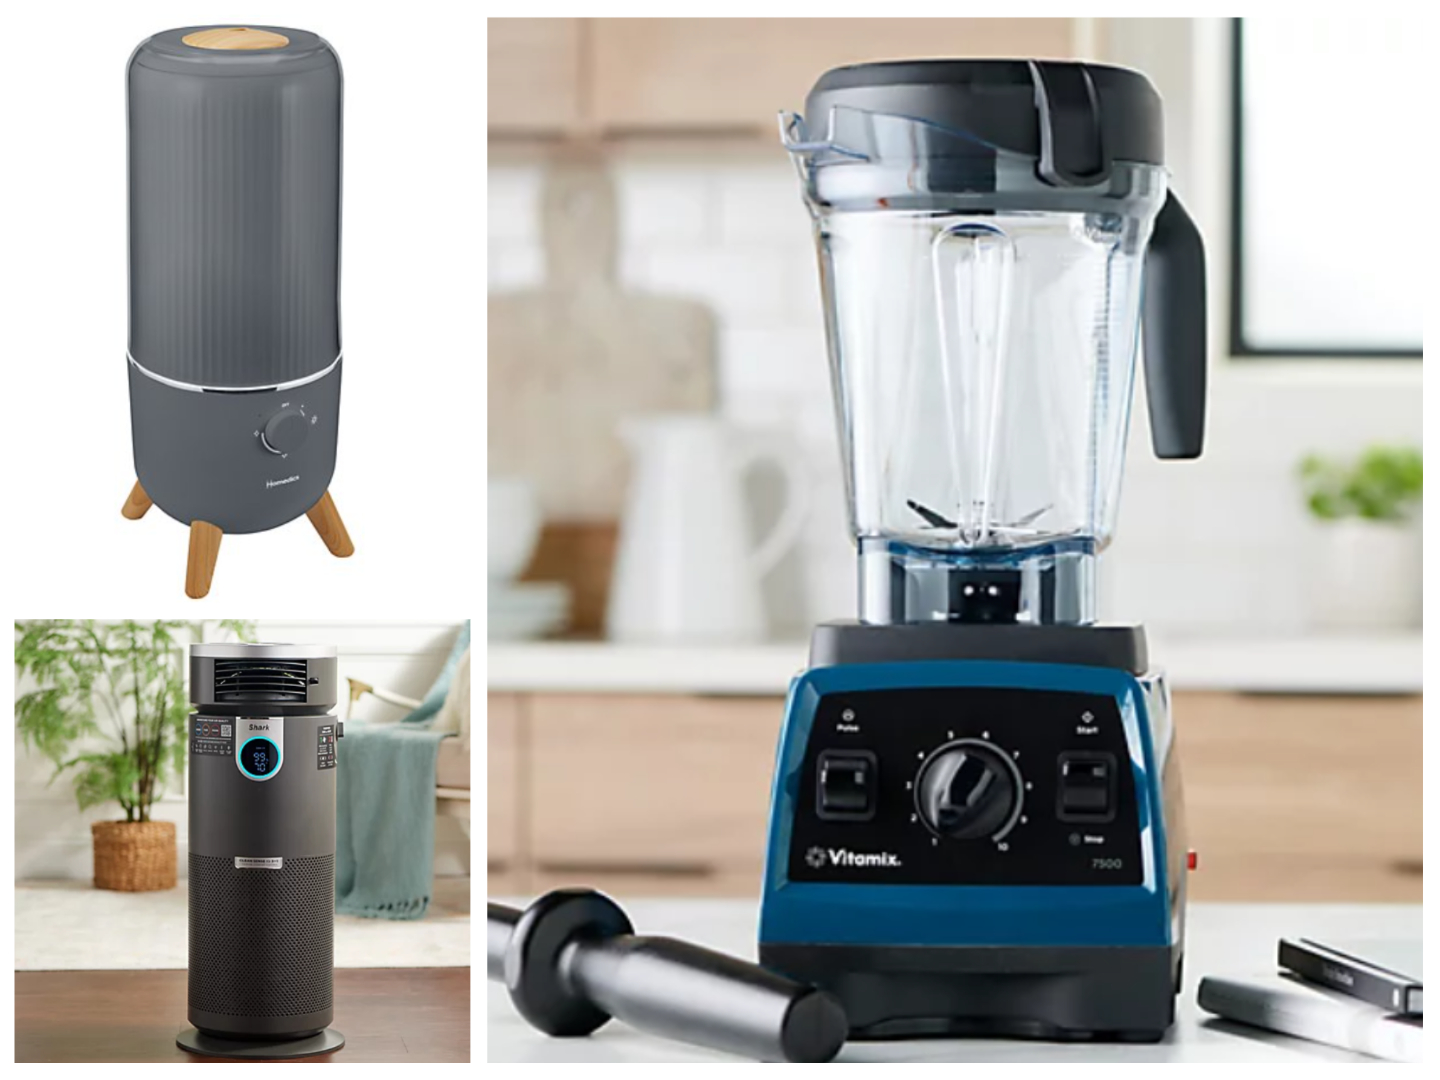 QVC's Don't-Miss Deals have Vitamix, humidifiers and more 